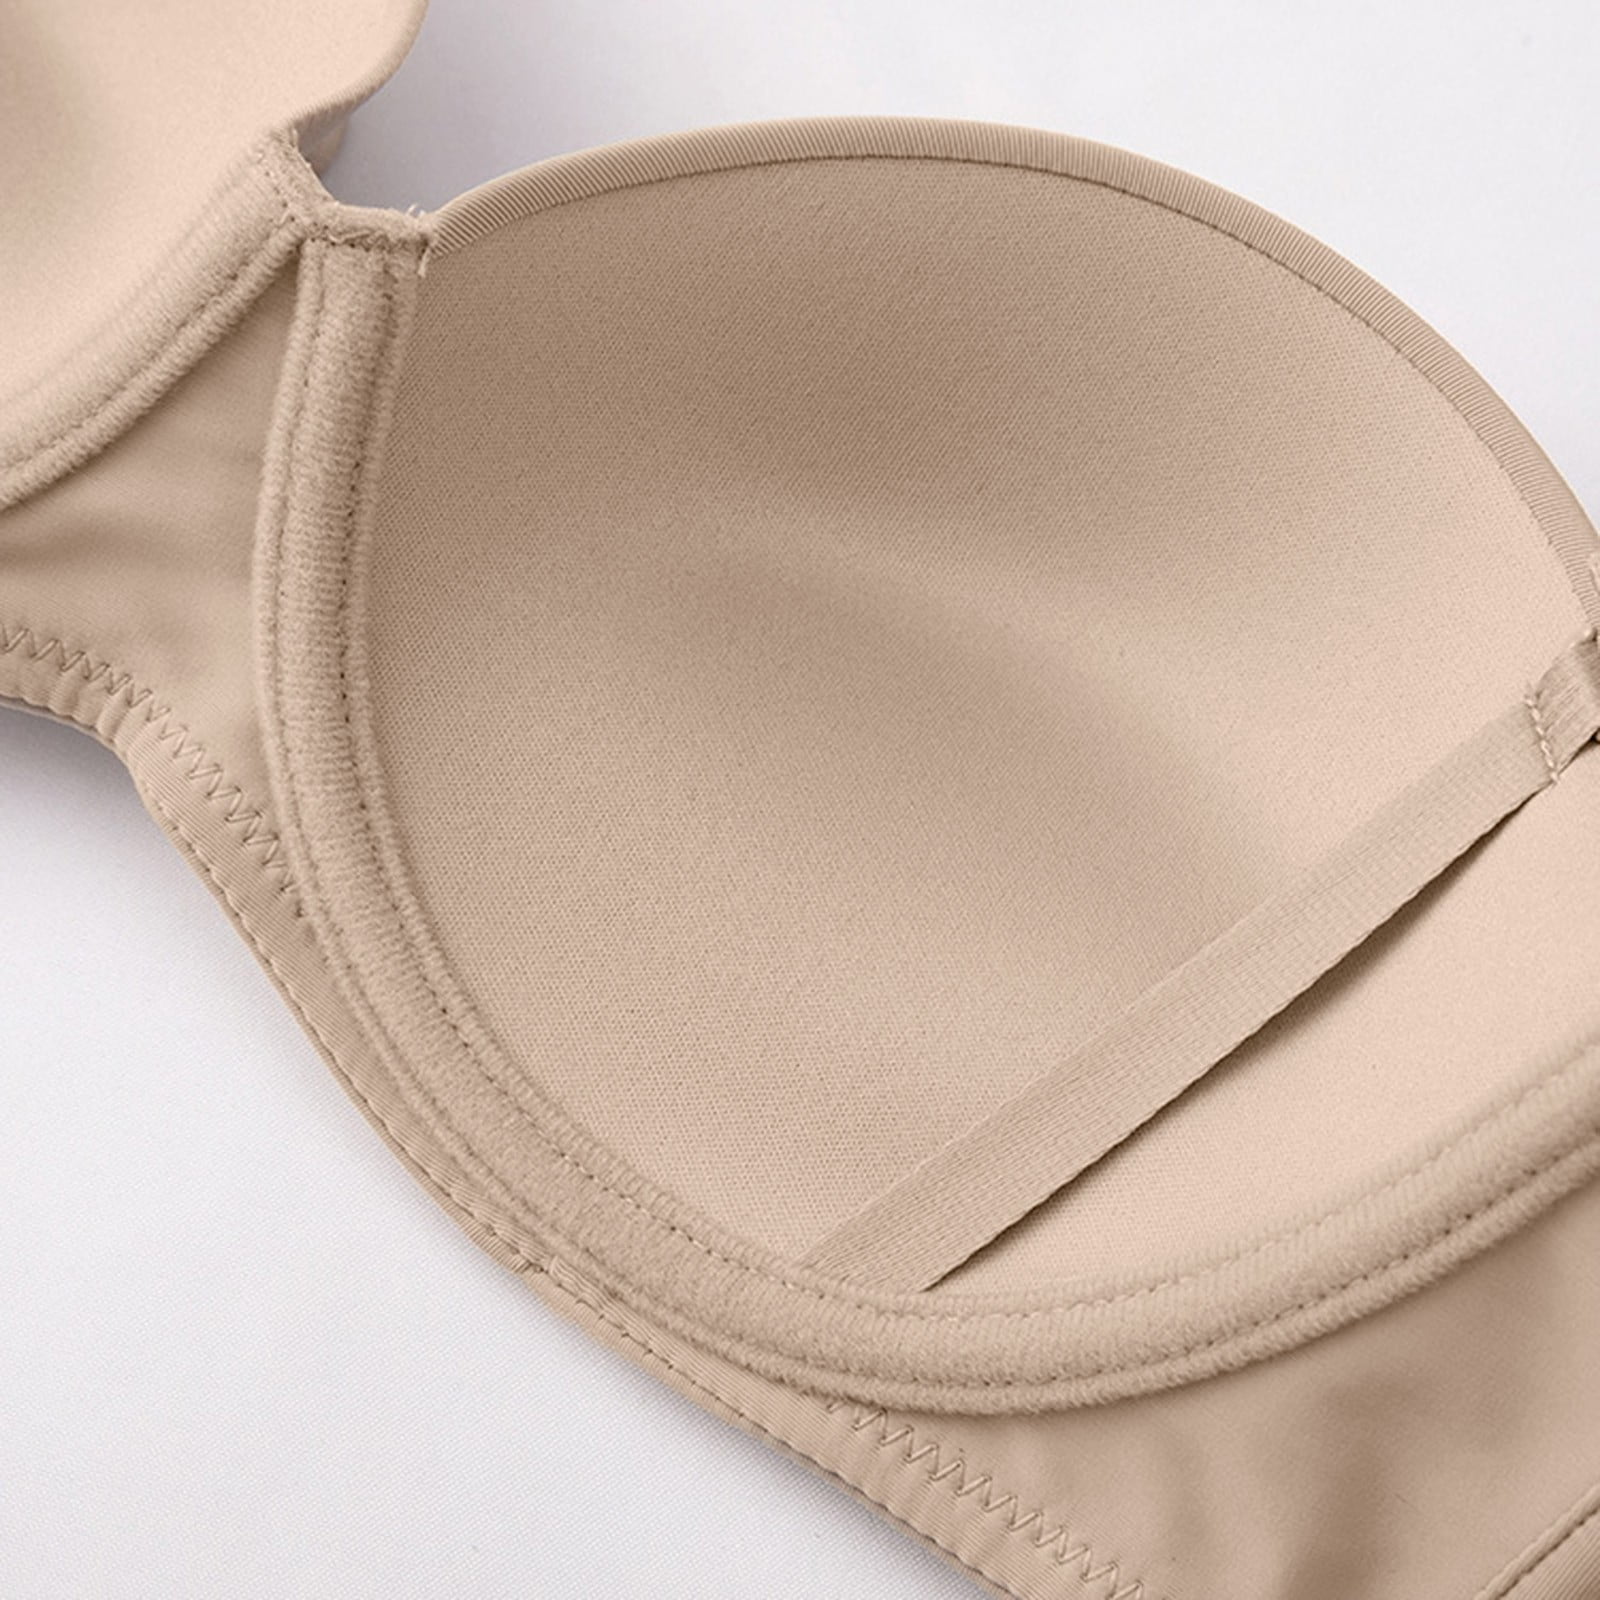 Fsqjgq Women Seamless Bras Solid Seamless Breathable Sports Bra Lingerie  Plus Size Push up Shaping Cup Underwear Vest Rose Gold Xl 